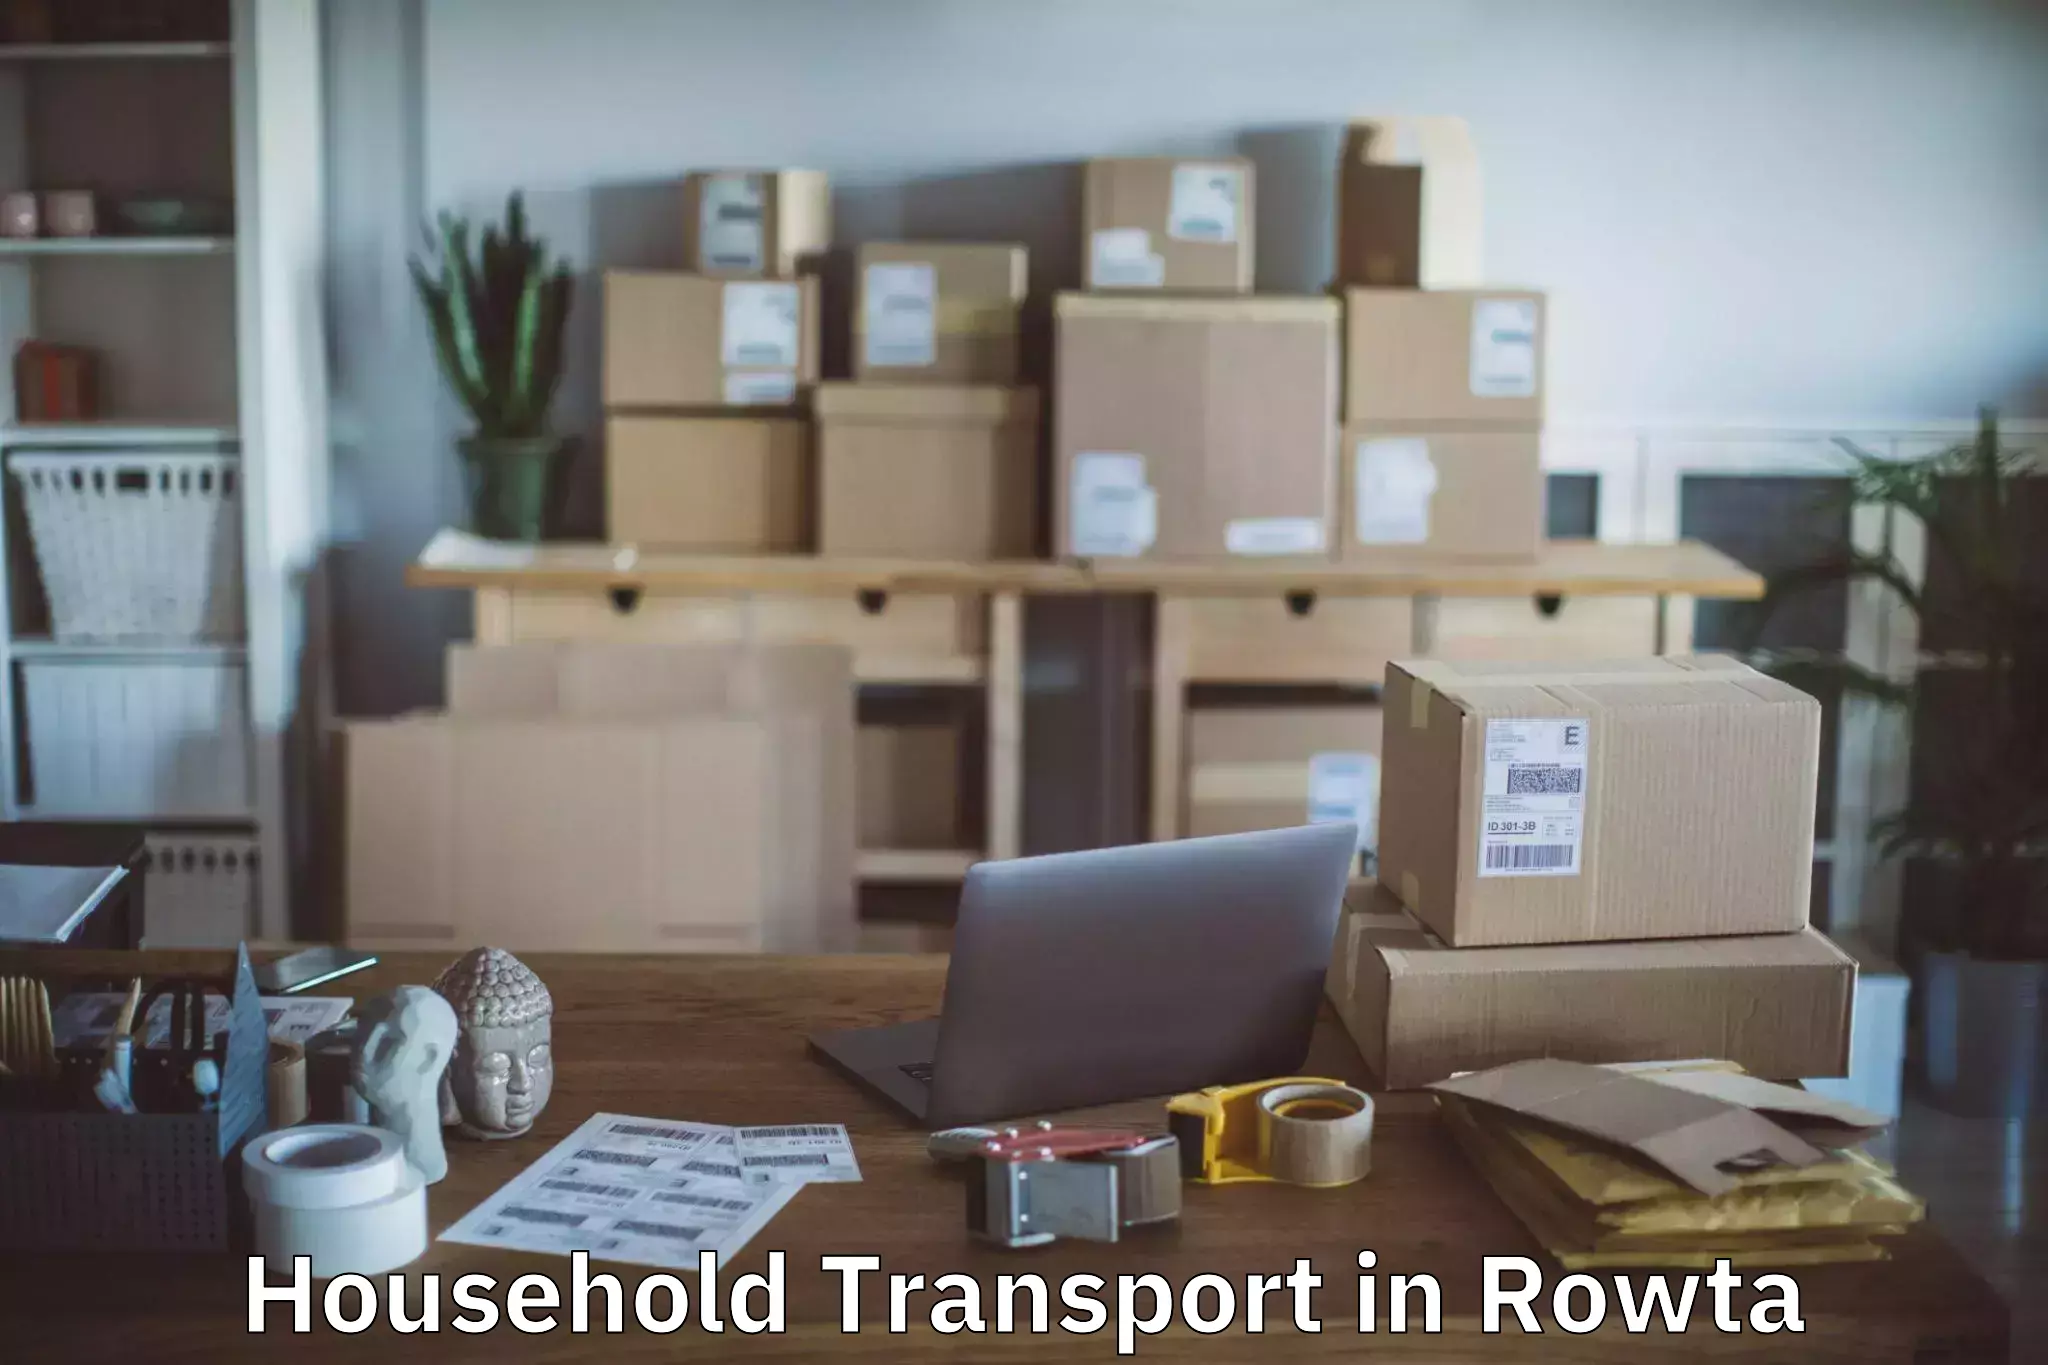 Household transport services in Rowta